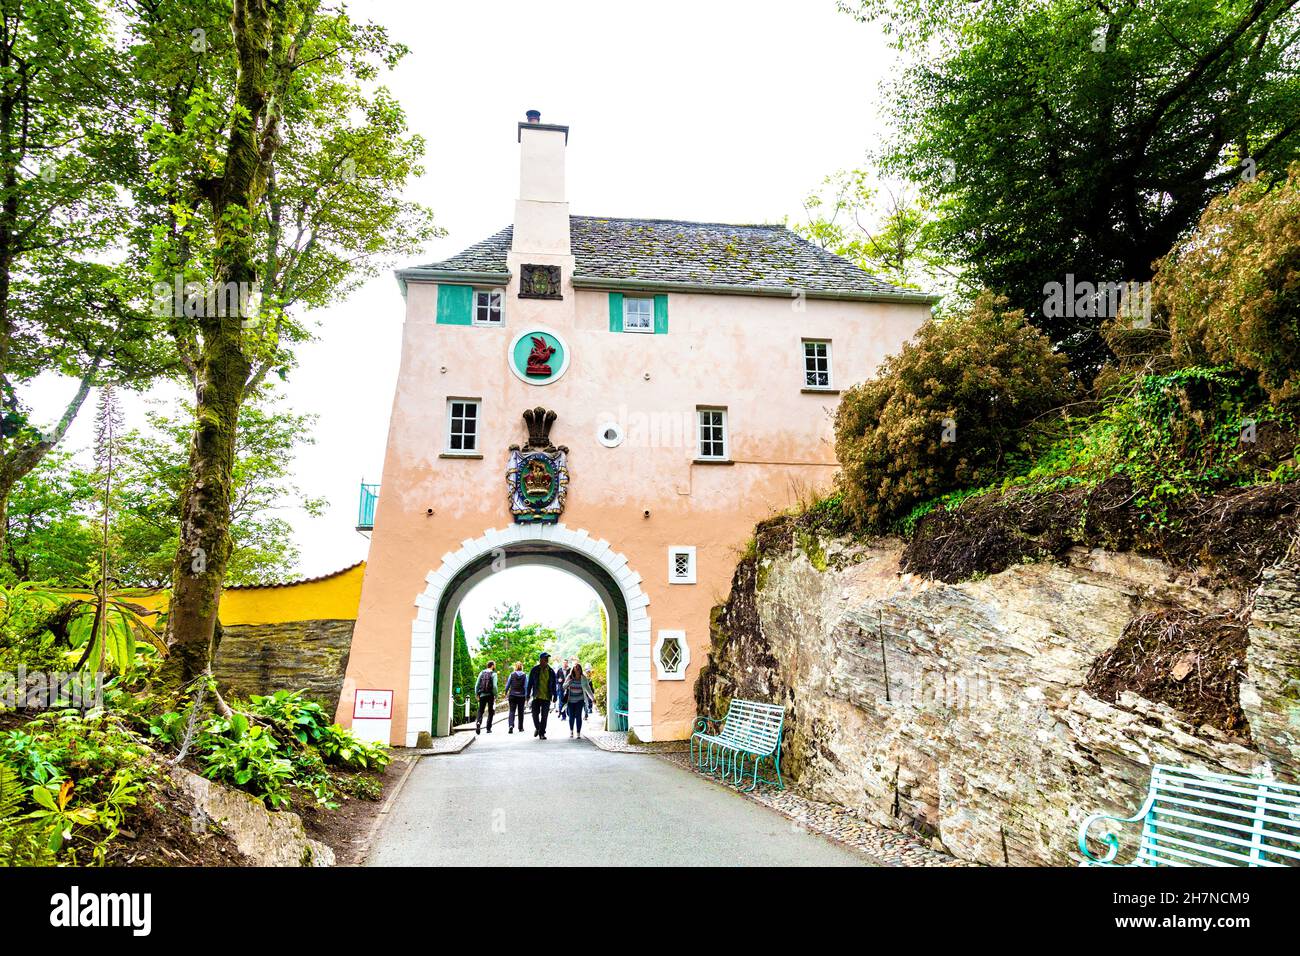 Colourful building at Mediterranean style town Portmeirion, Snowdonia National Park, Wales, UK Stock Photo